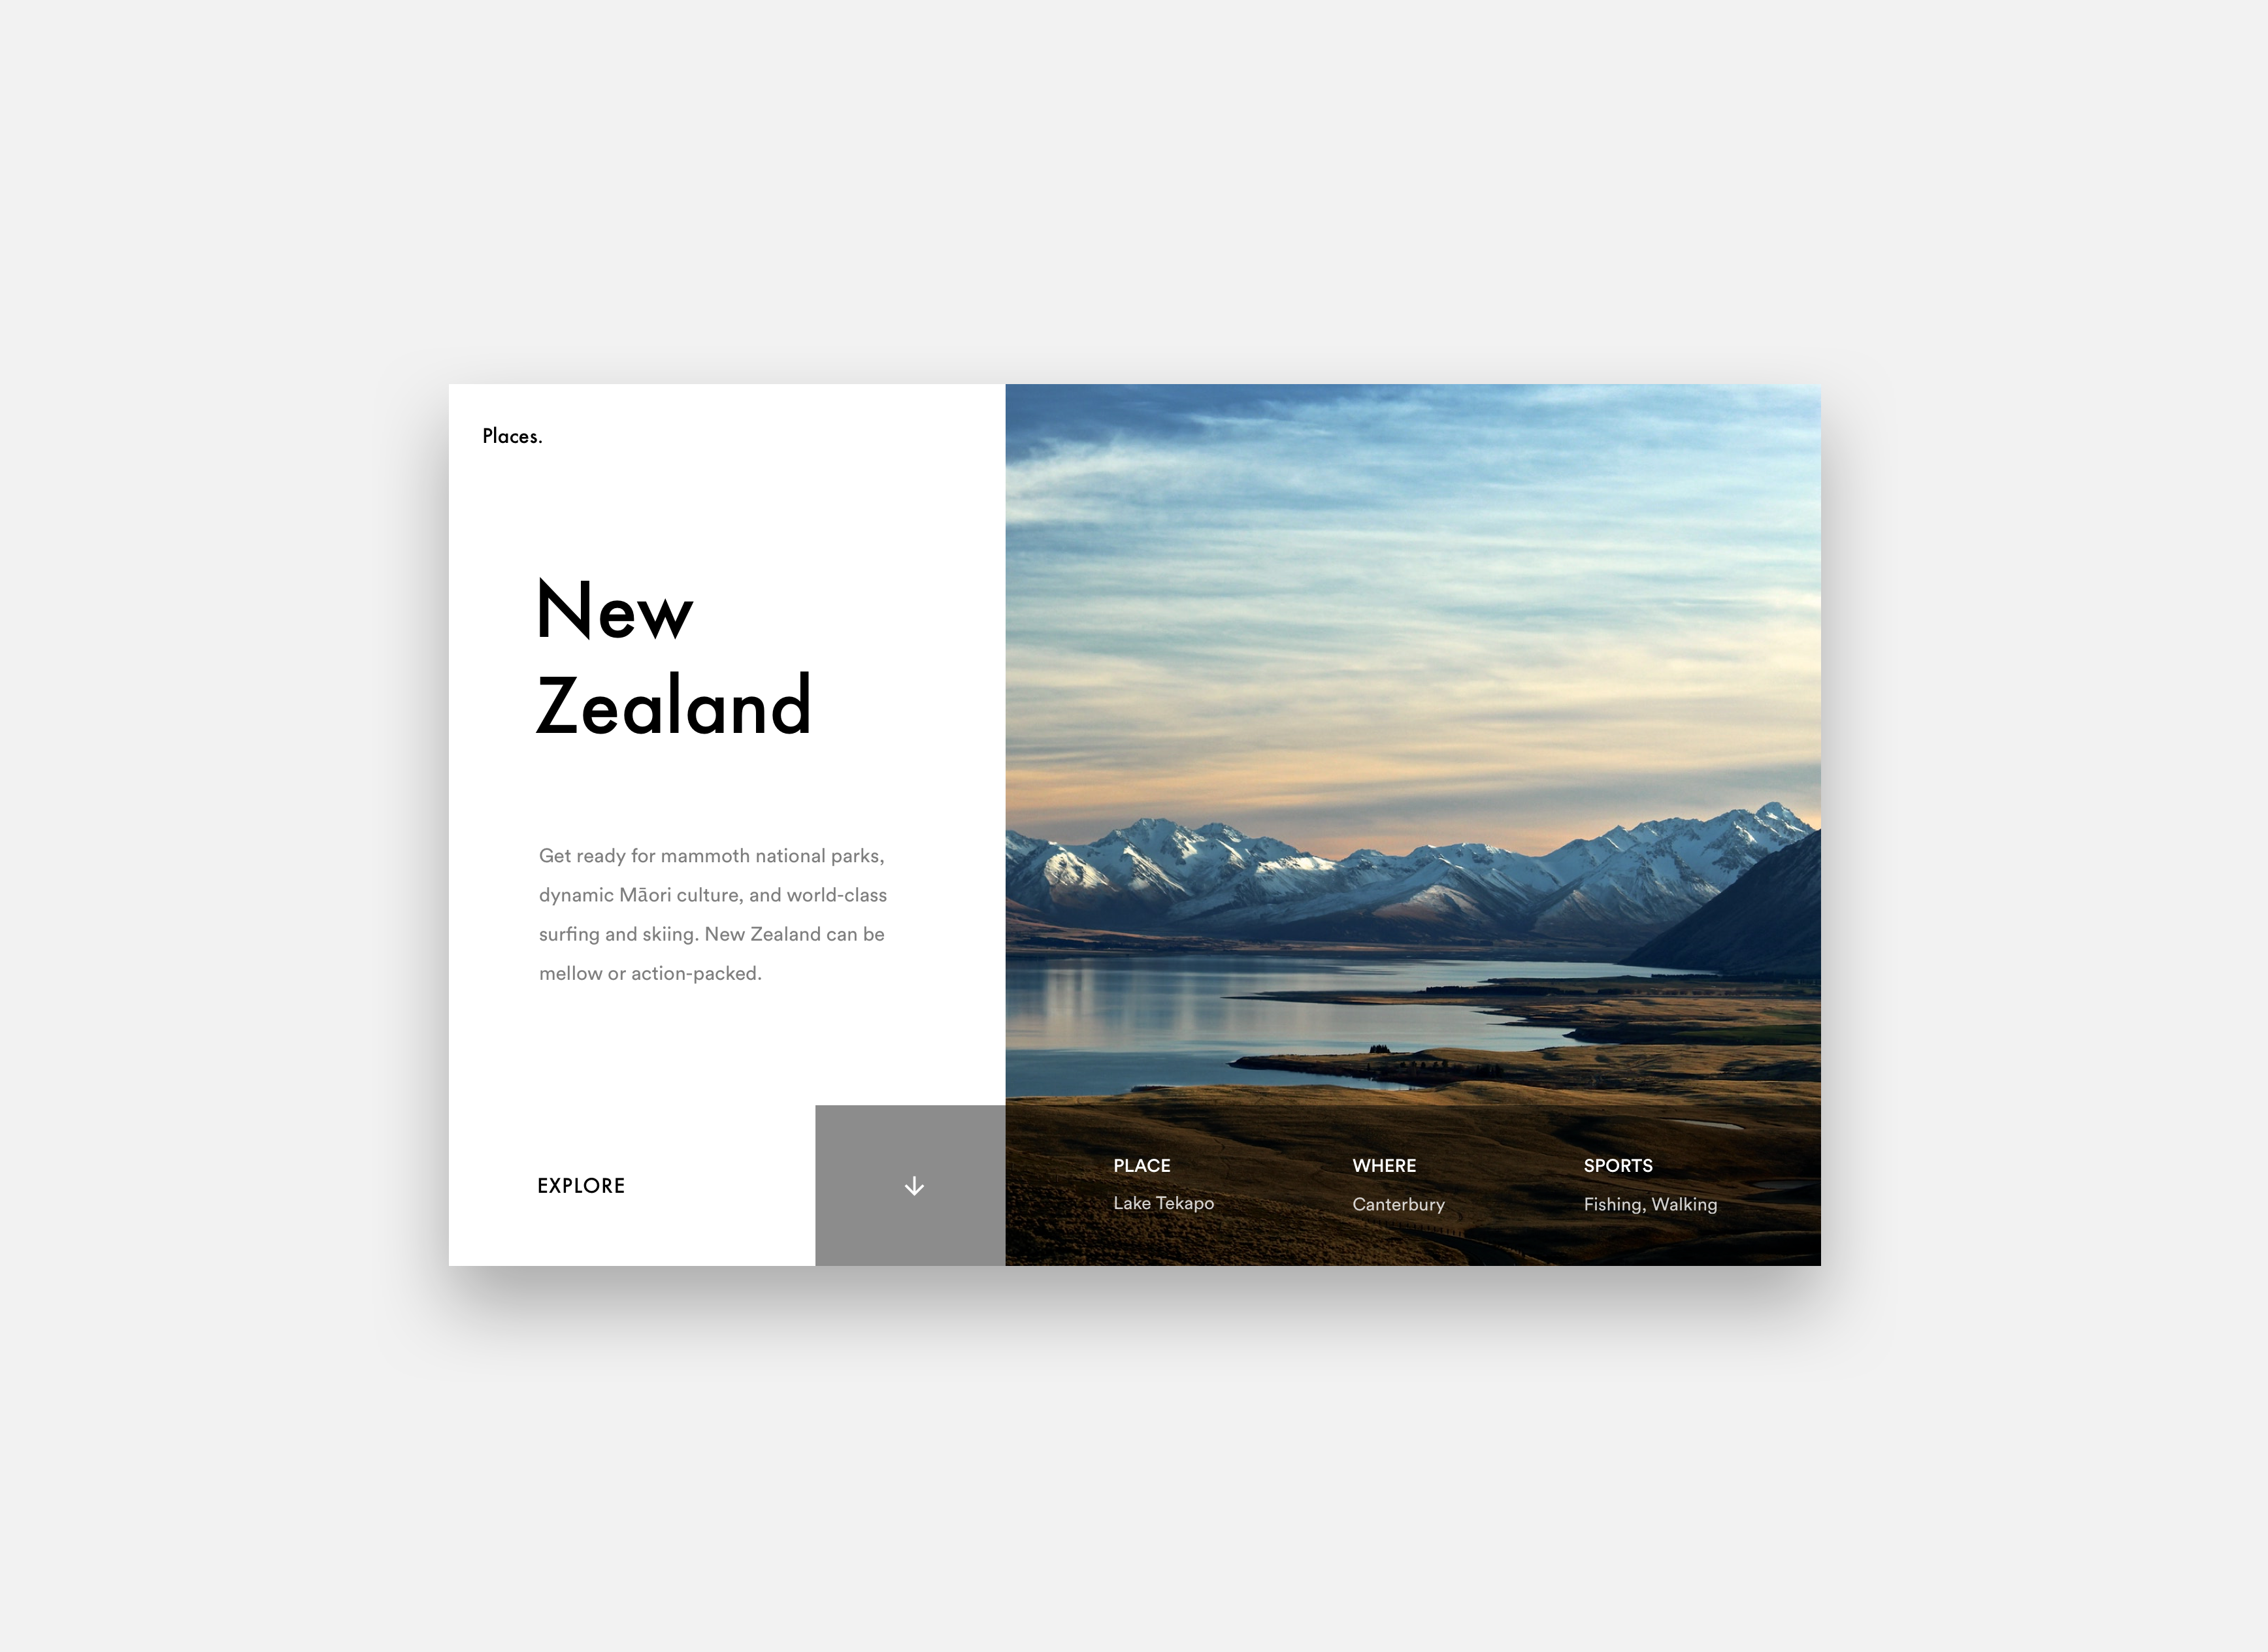 Places by Nicola Baldo for Norde on Dribbble